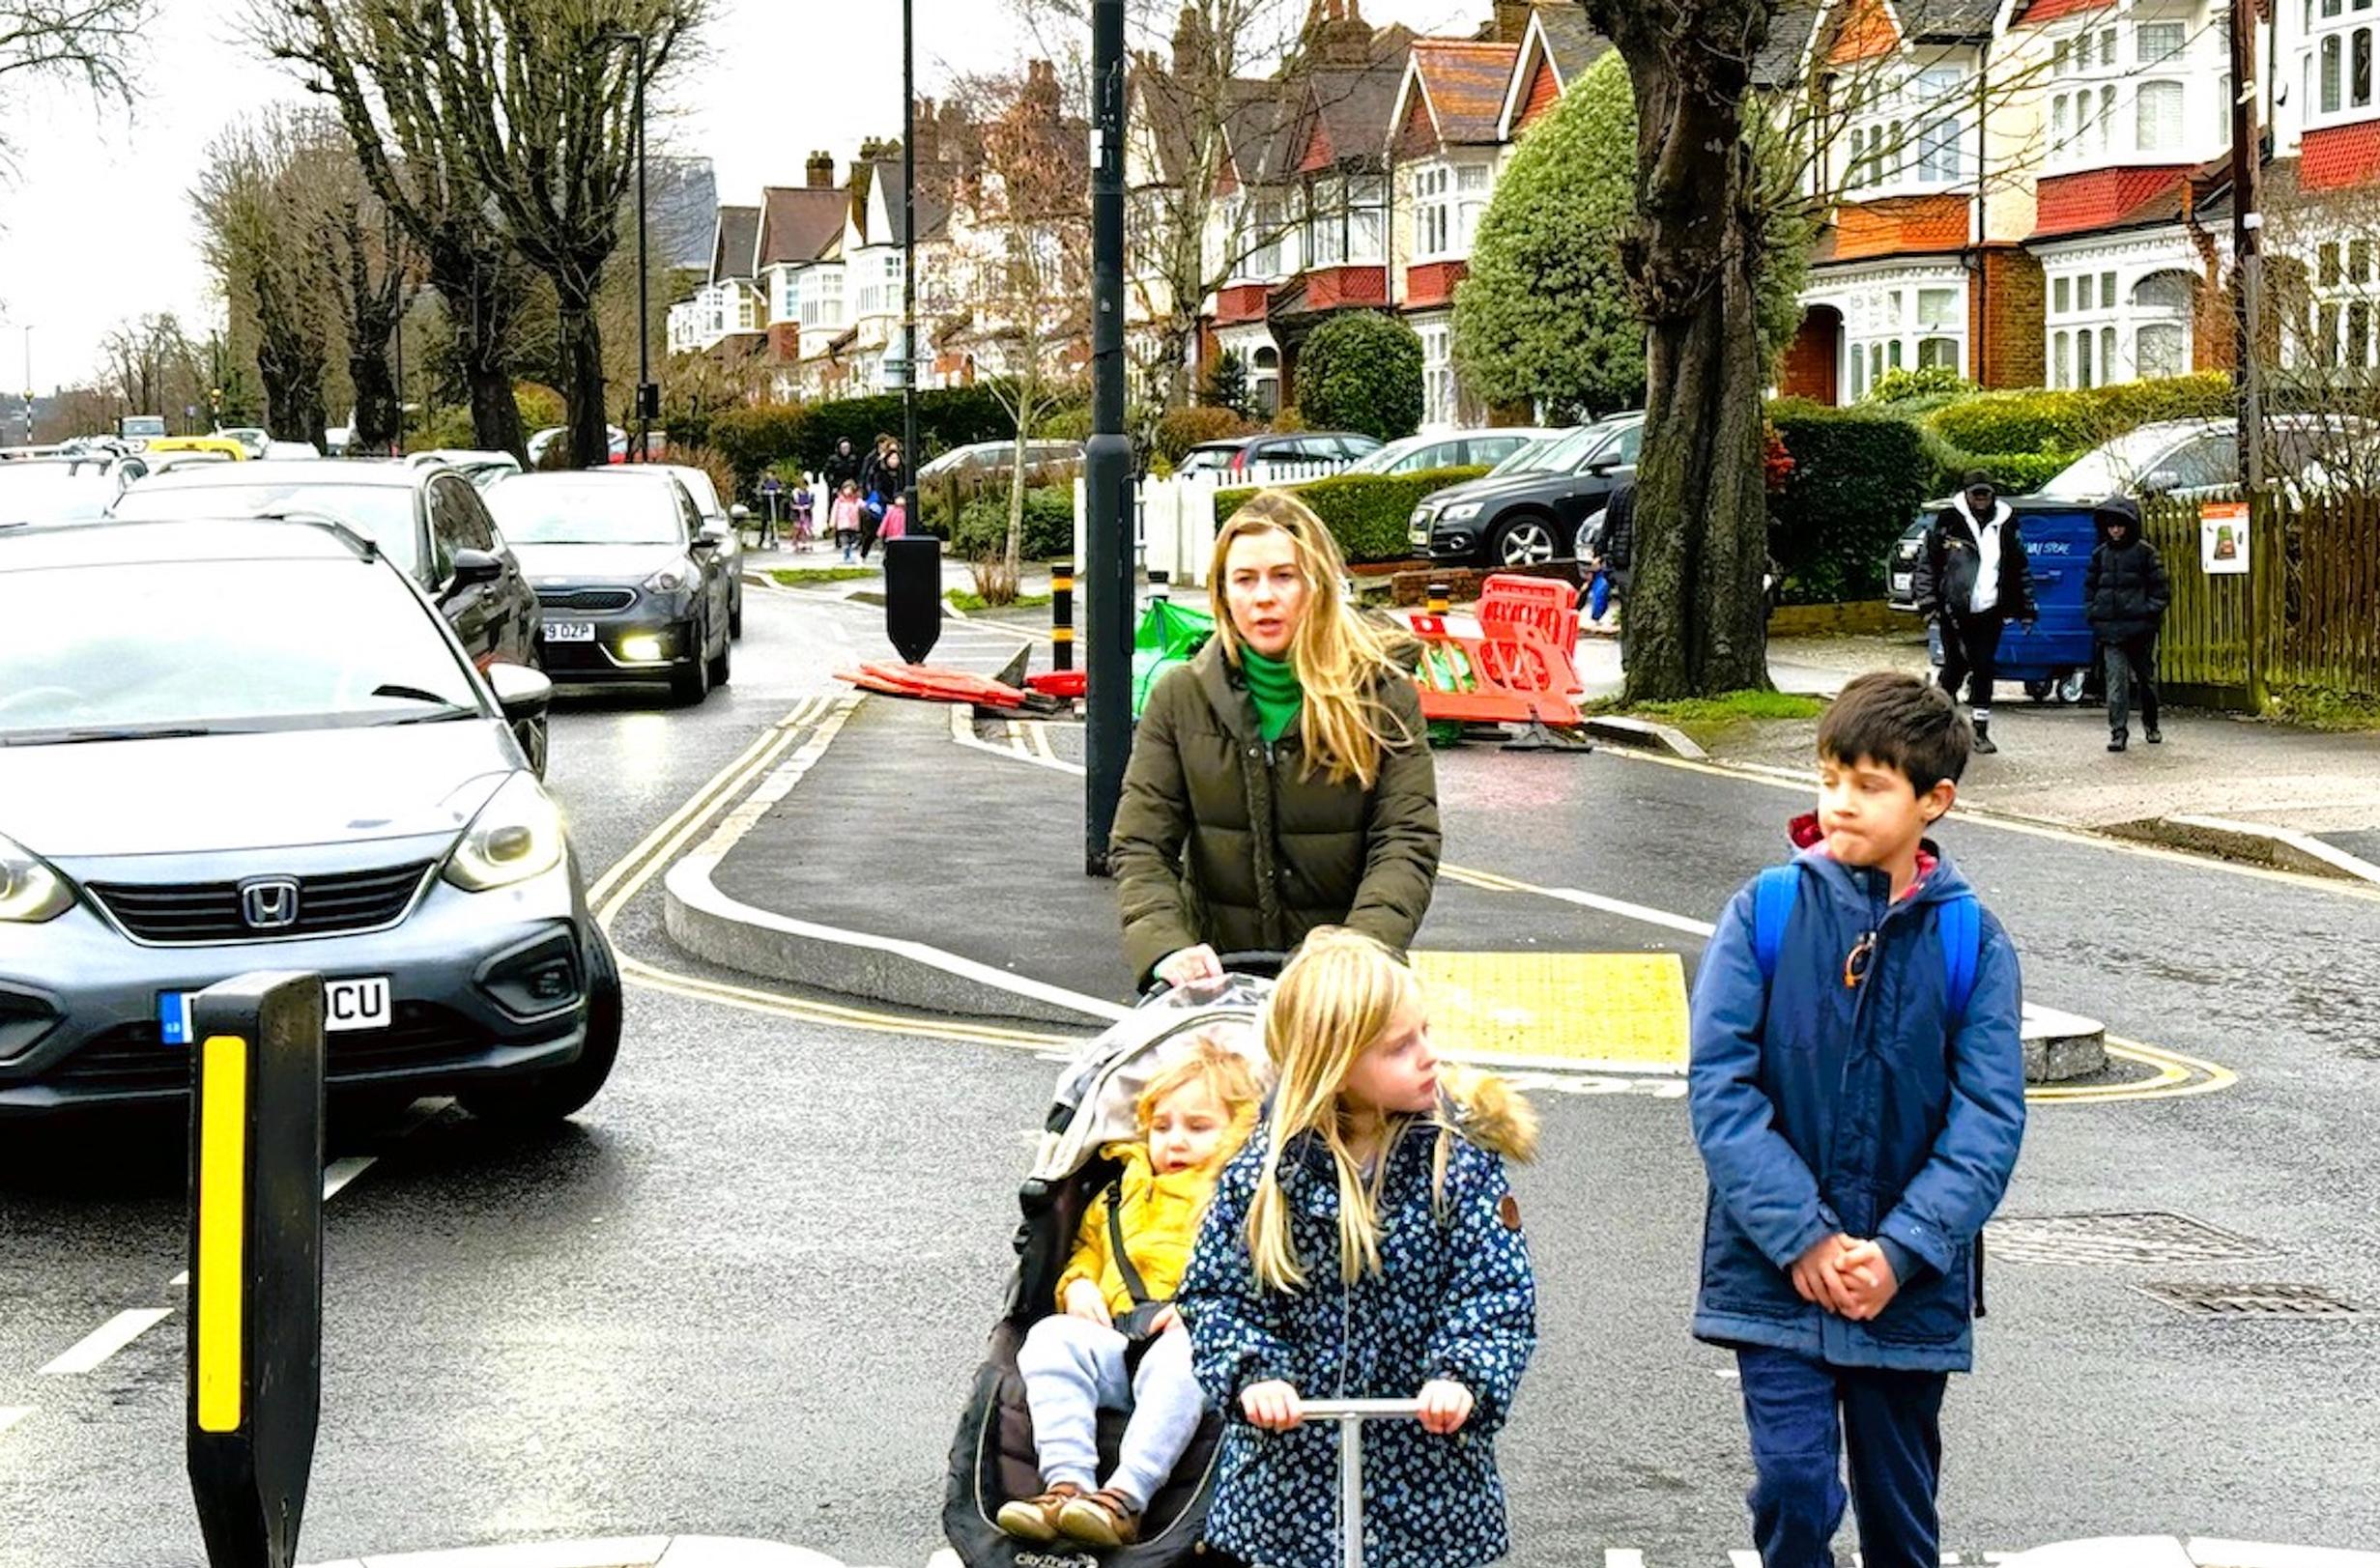 `With so many families travelling more than a mile to school, they need more help to get to school in a way that is healthy, less stressful and doesn’t damage our local environment` - Nicola Pastore, parent and co-founder of Solve the School Run